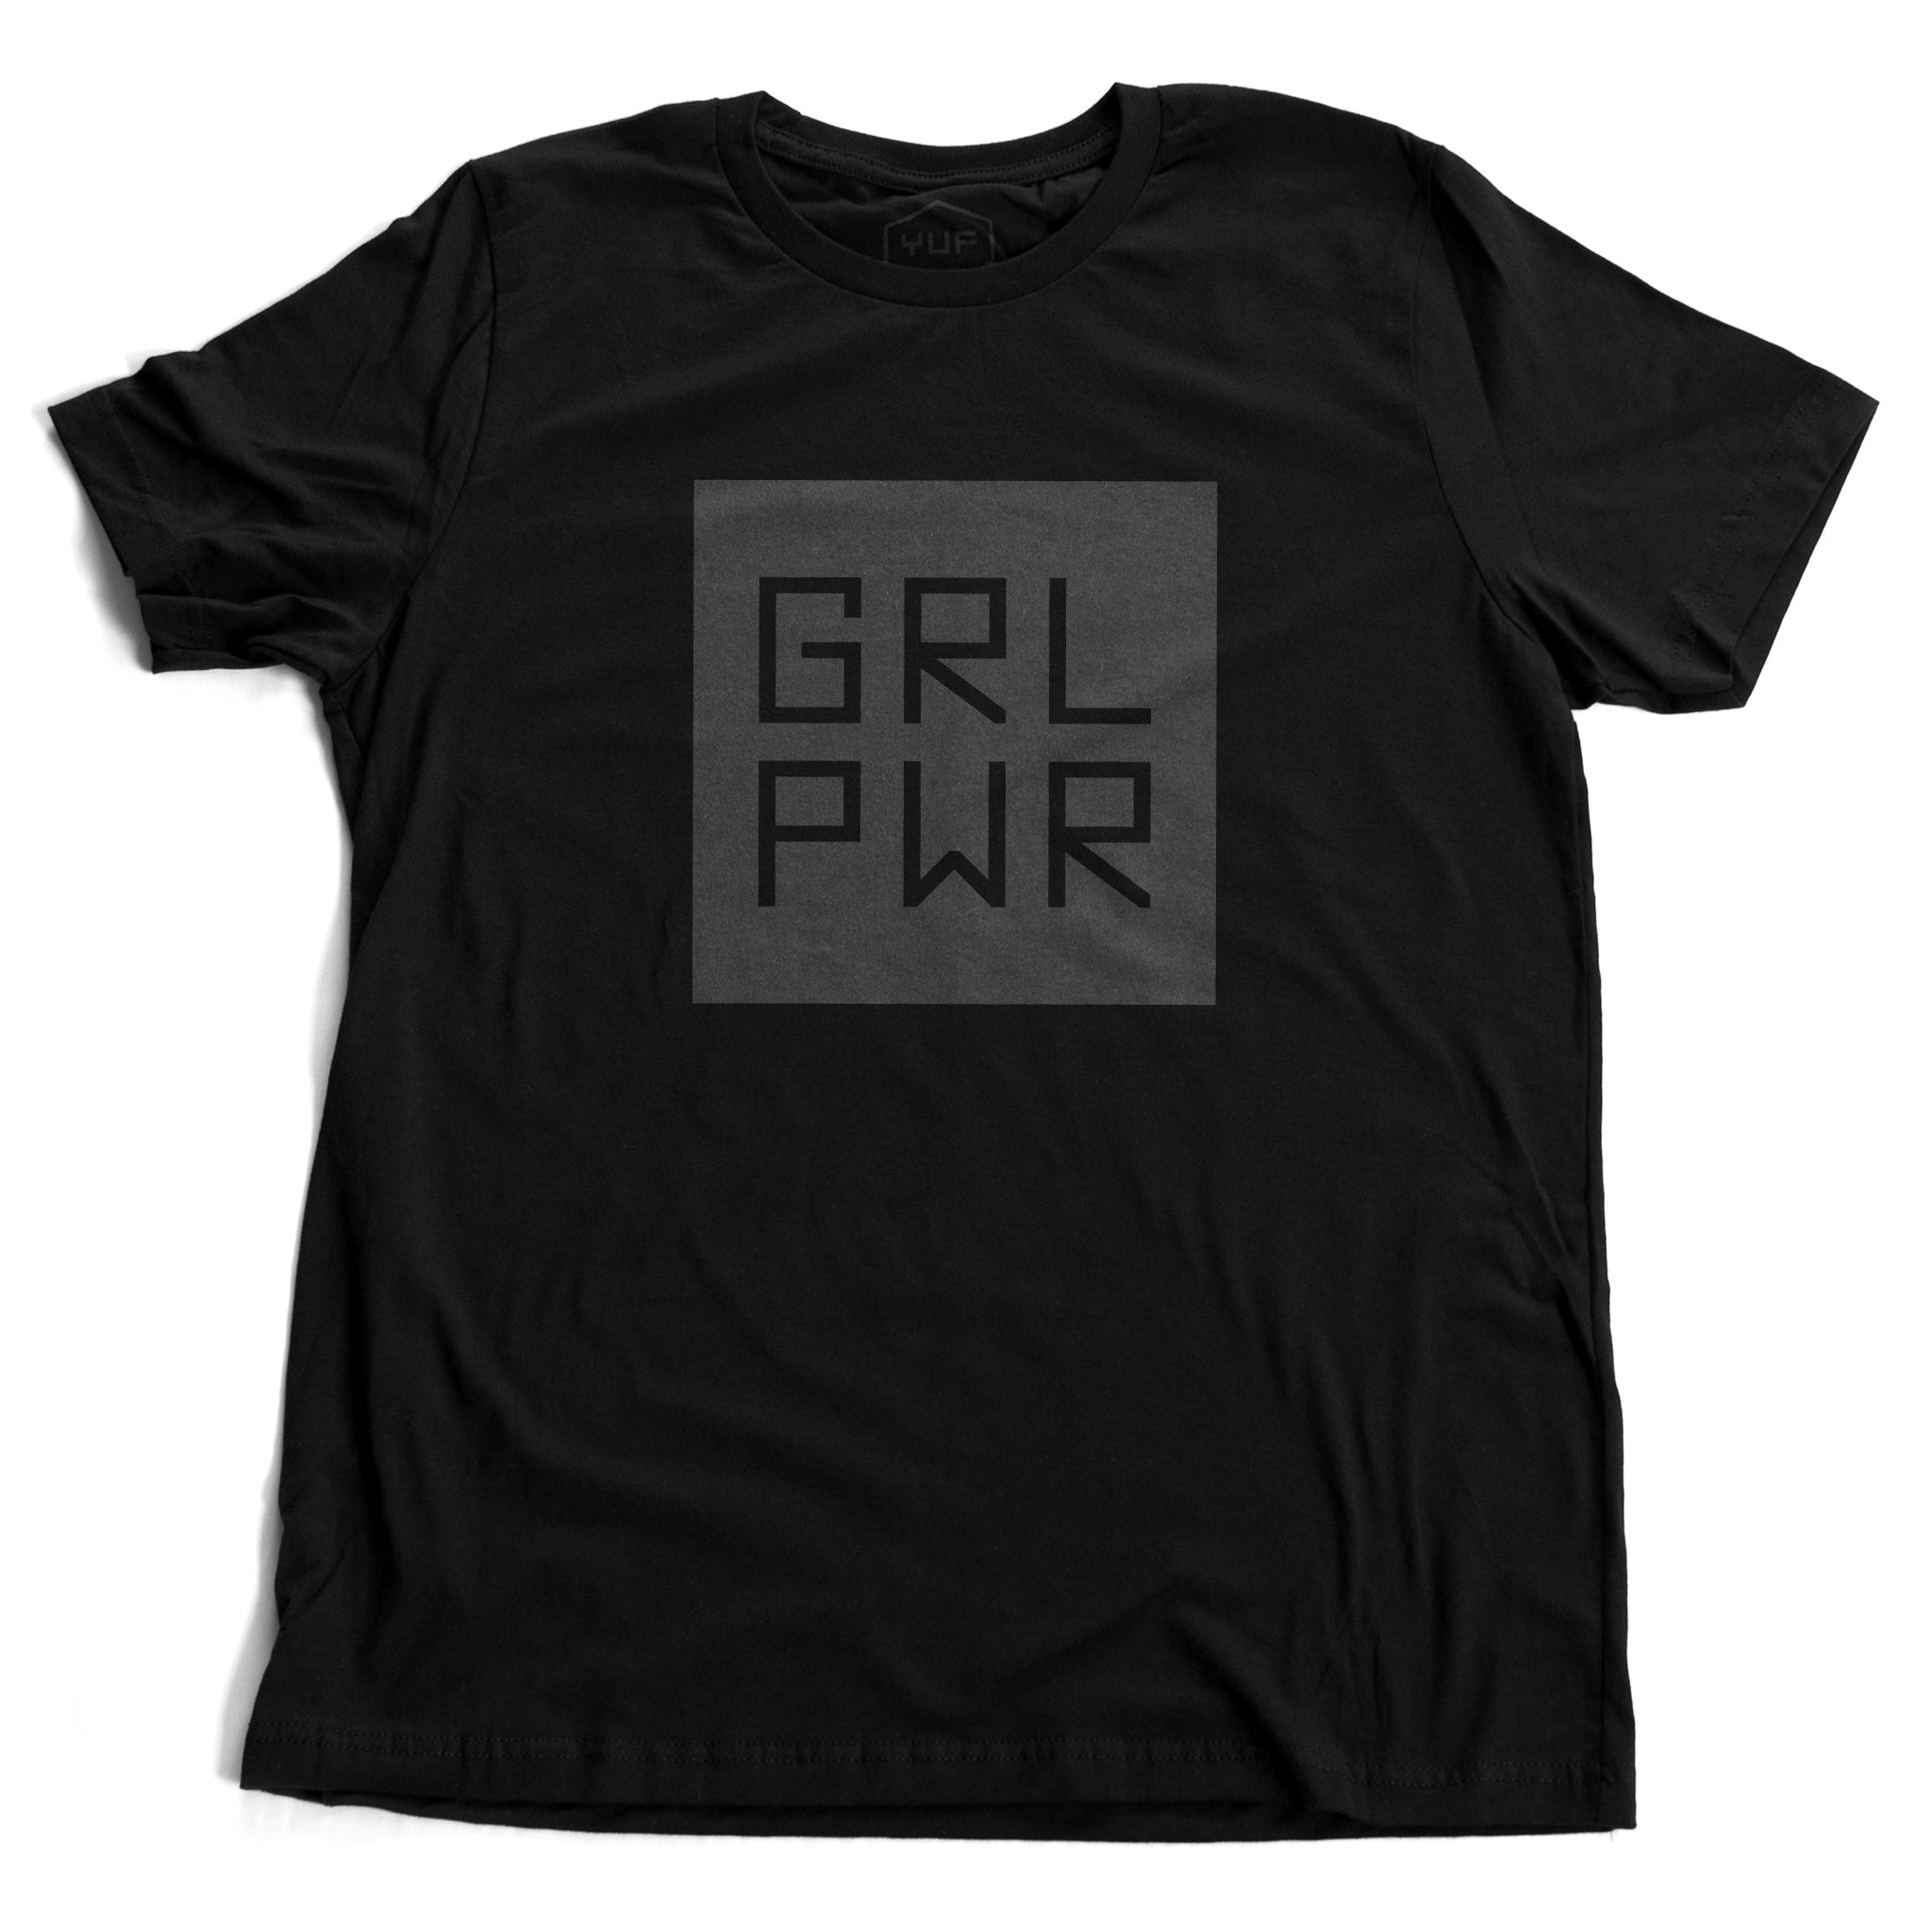 A black unisex t-shirt with a bold graphic representing “Girl Power,” abbreviated as GRL PWR. By fashion brand YUF, from wolfsaint.net